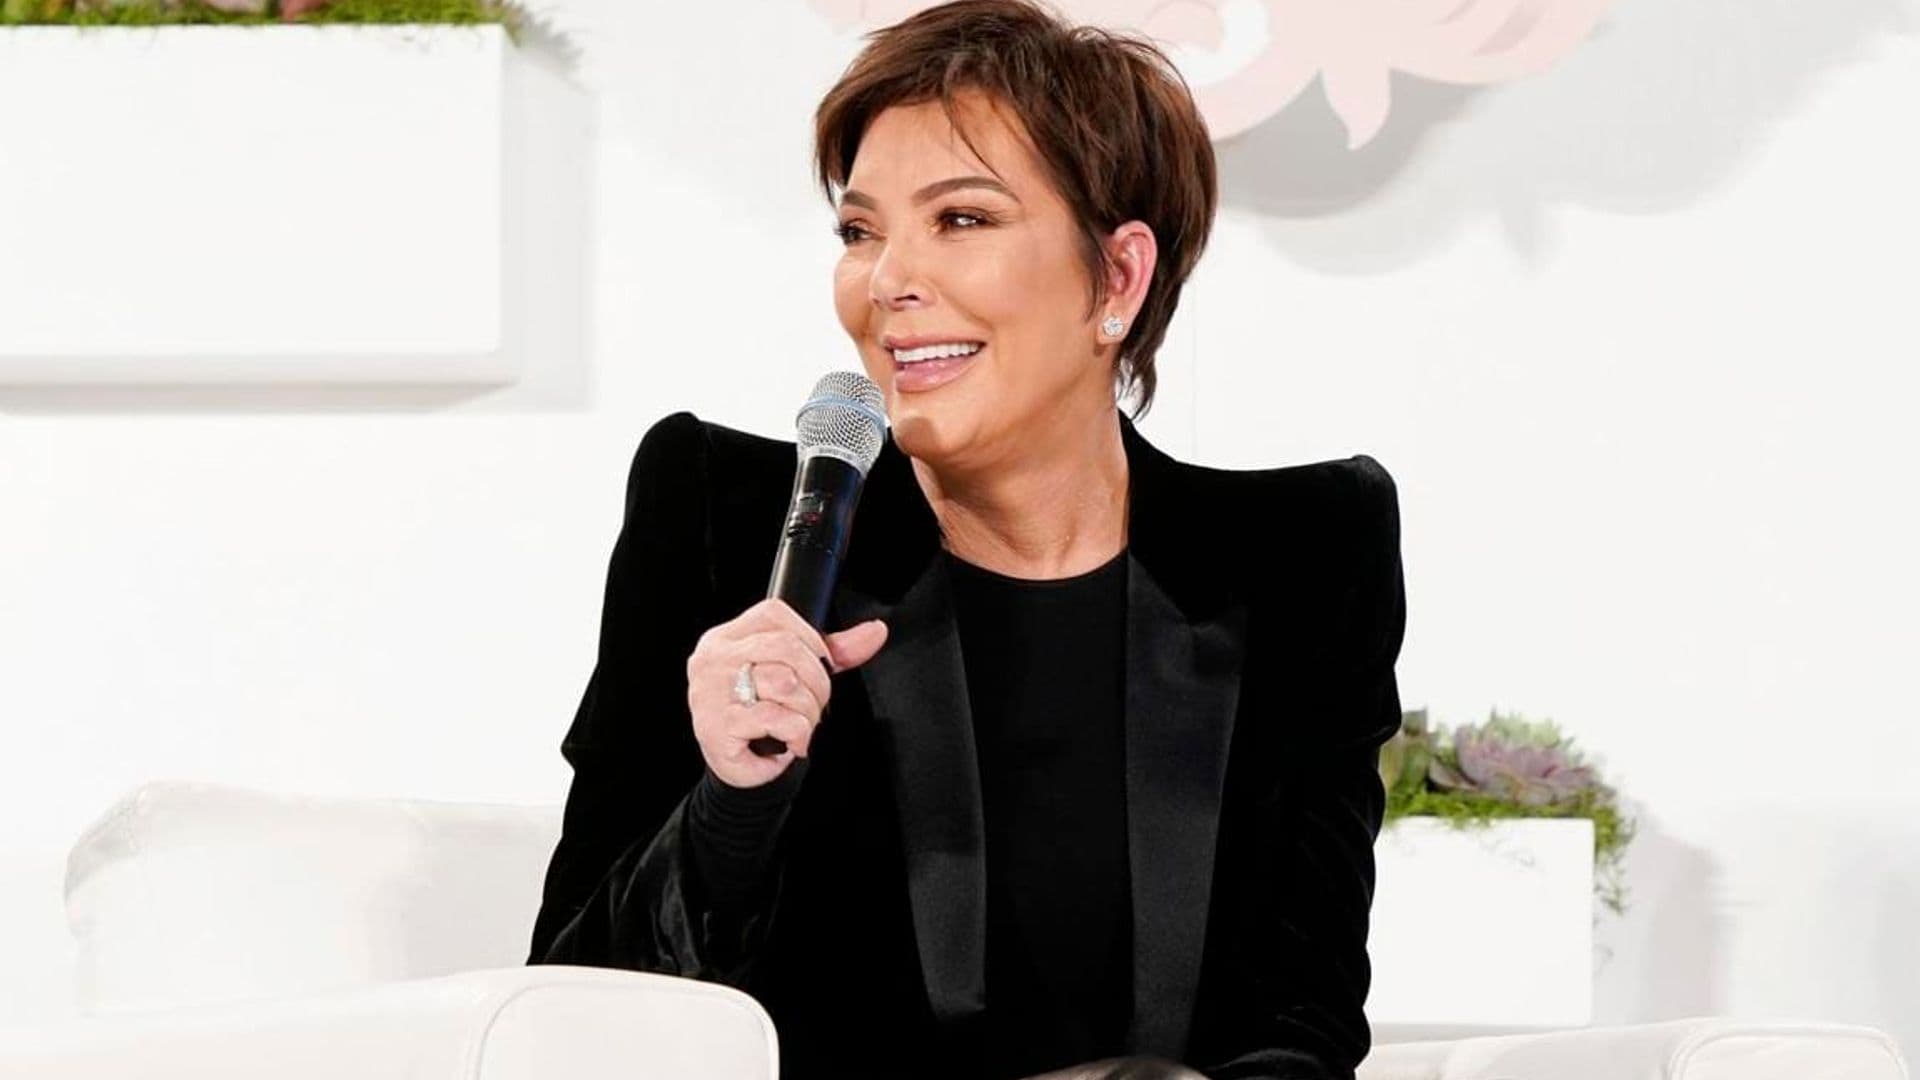 Kris Jenner struggles to process the end of ‘Keeping Up With The Kardashians’